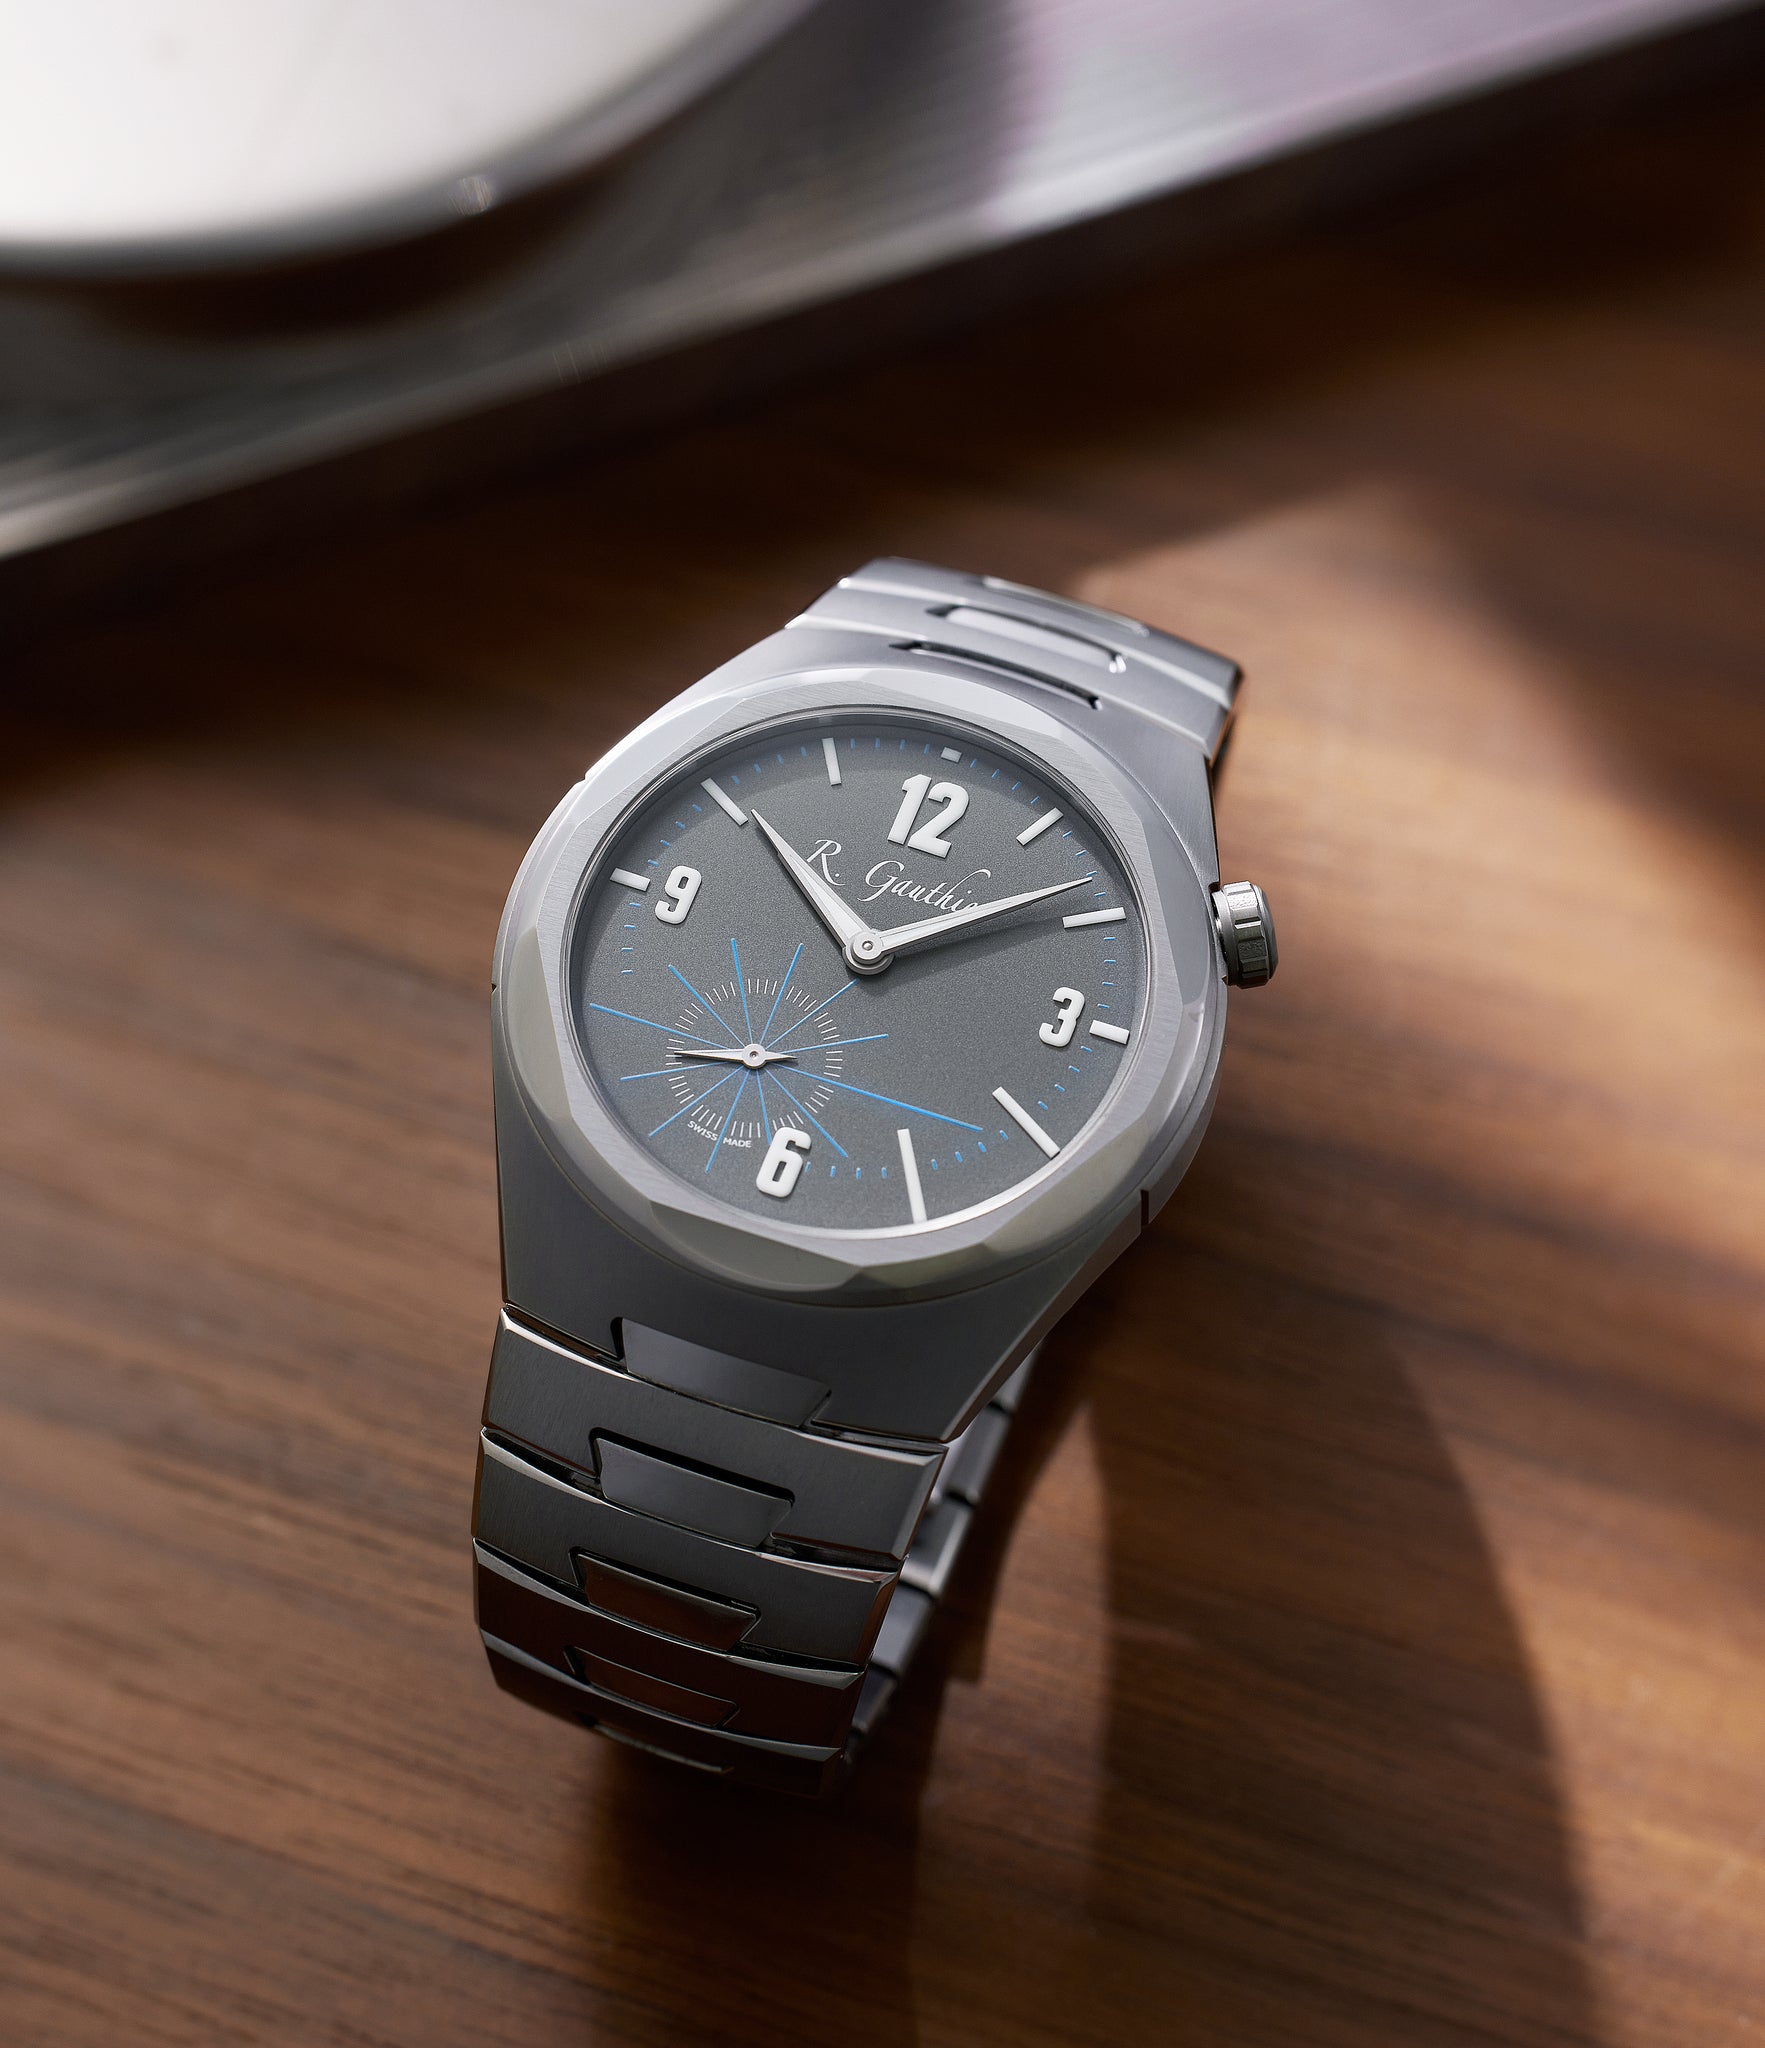 collect Romain Gauthier Continuum MON00580 Titanium preowned watch at A Collected Man London